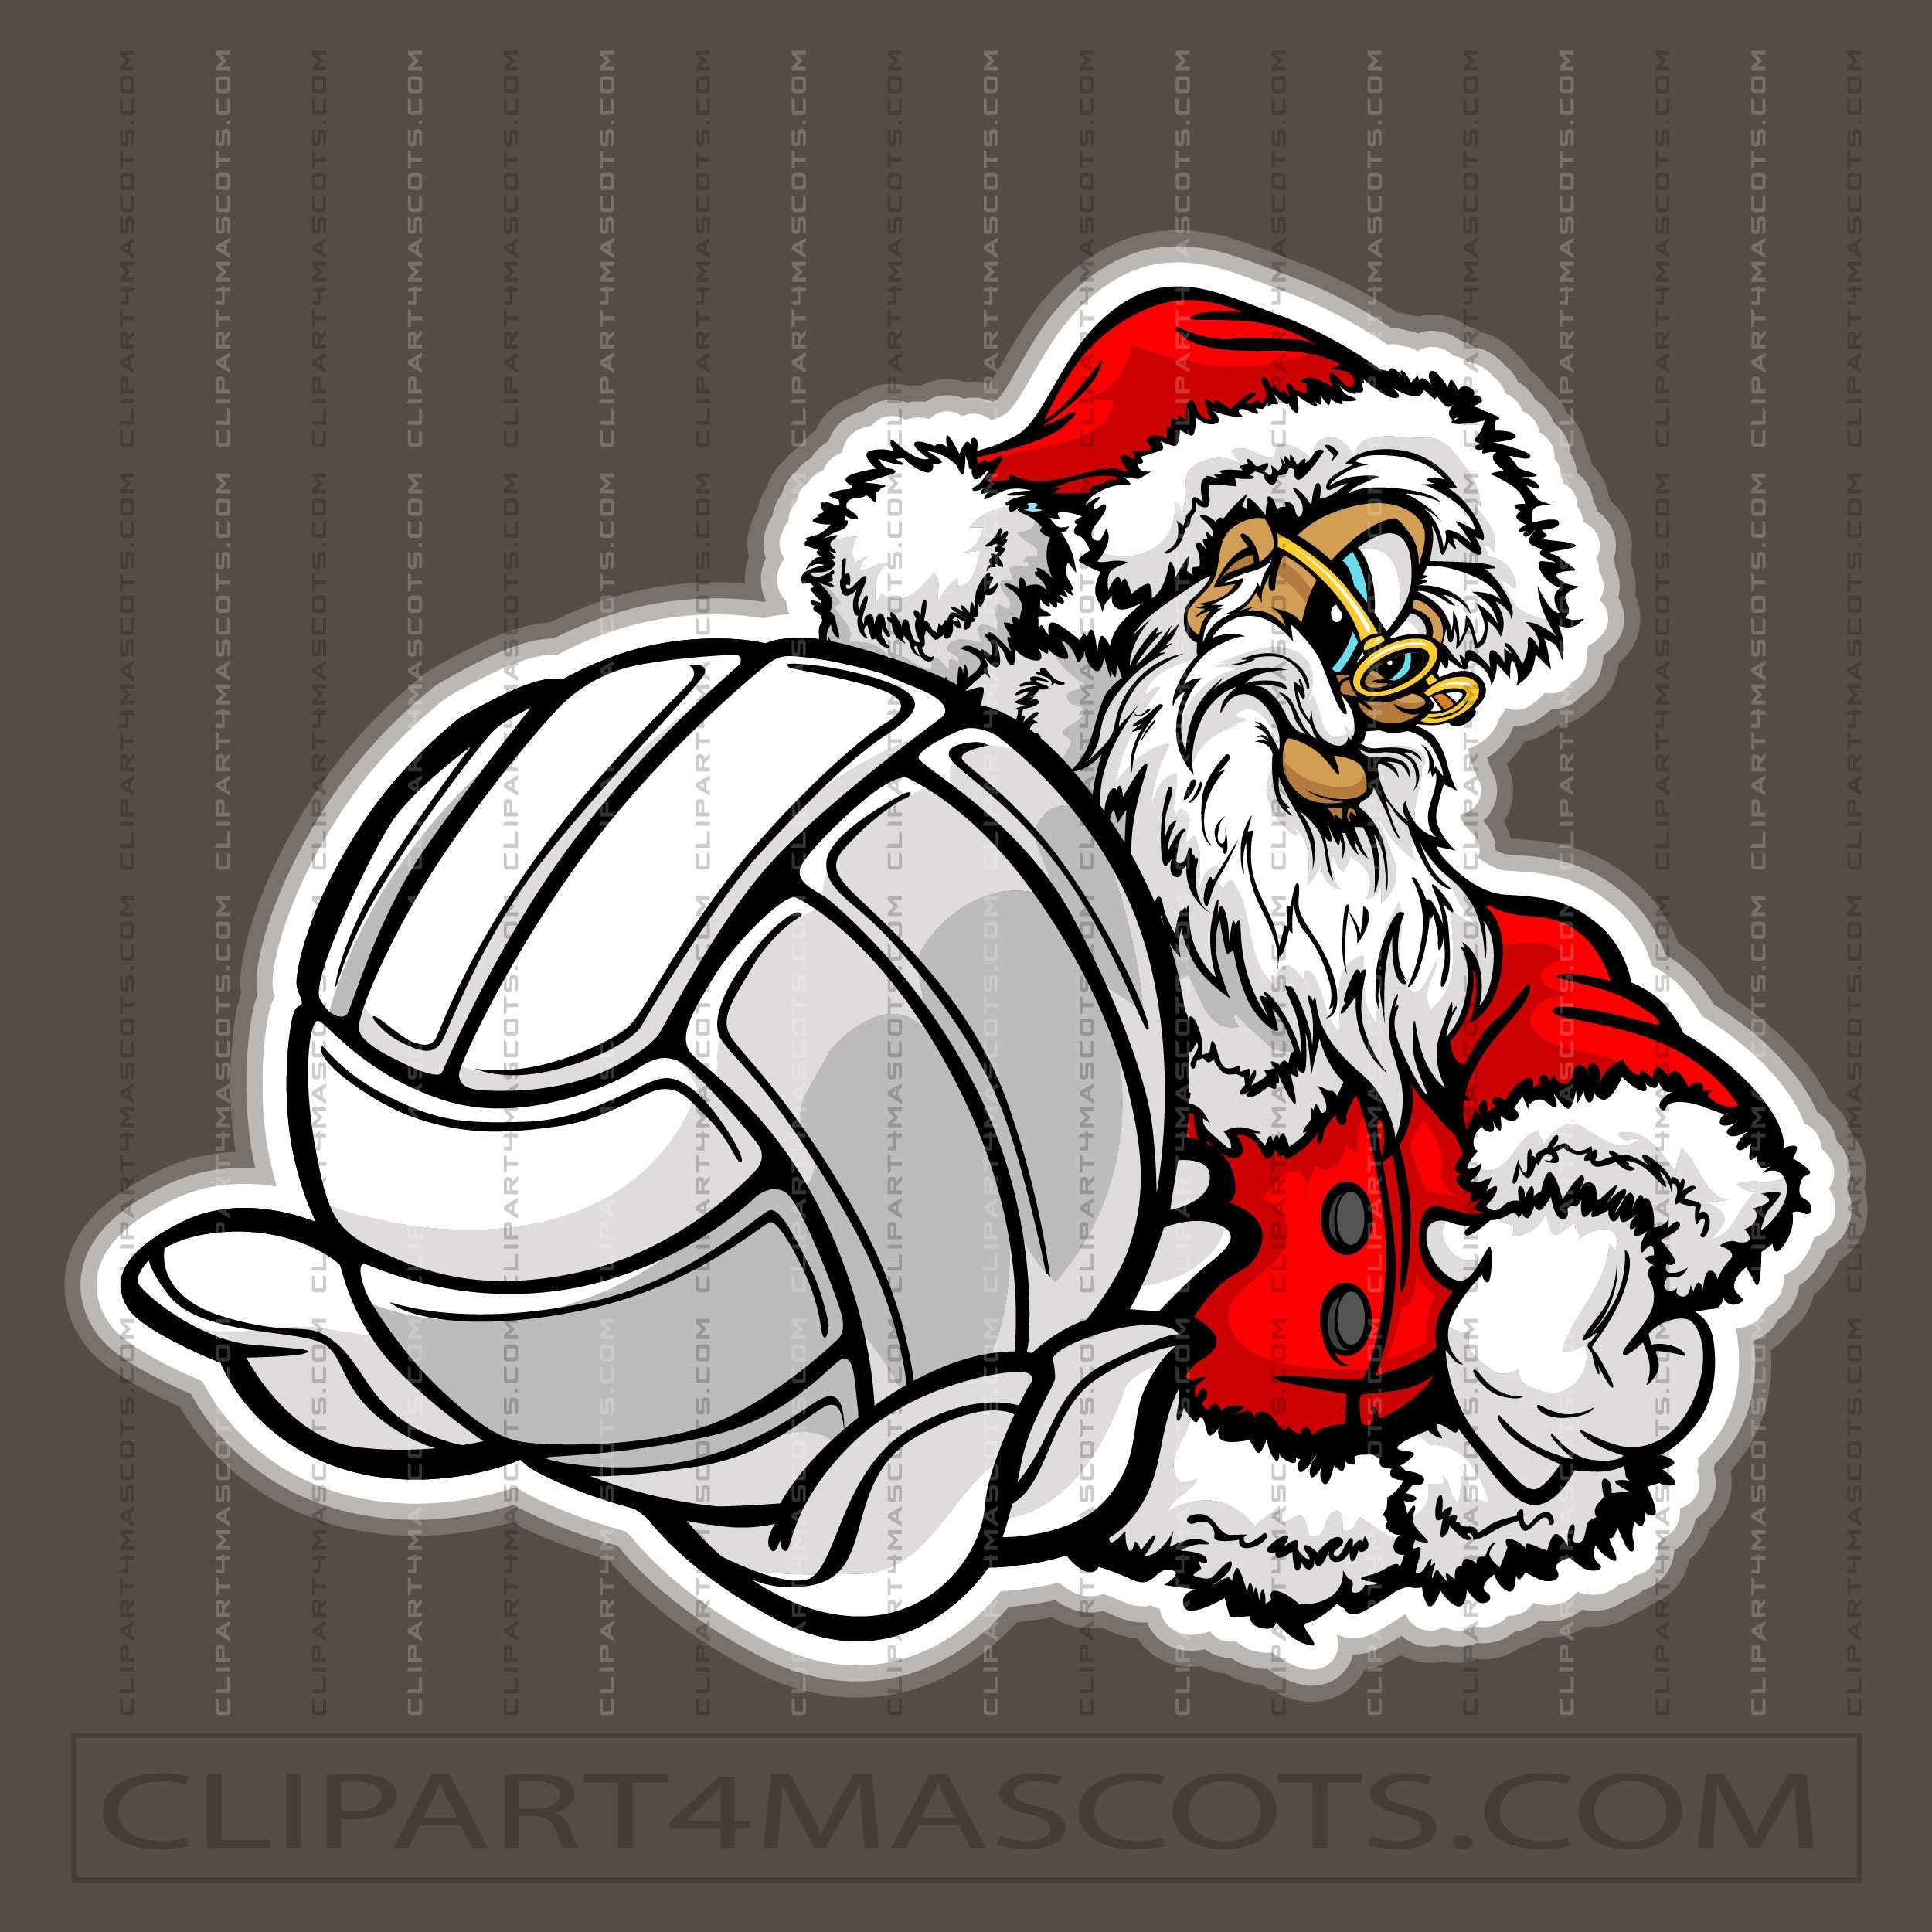 Holiday Volleyball Image